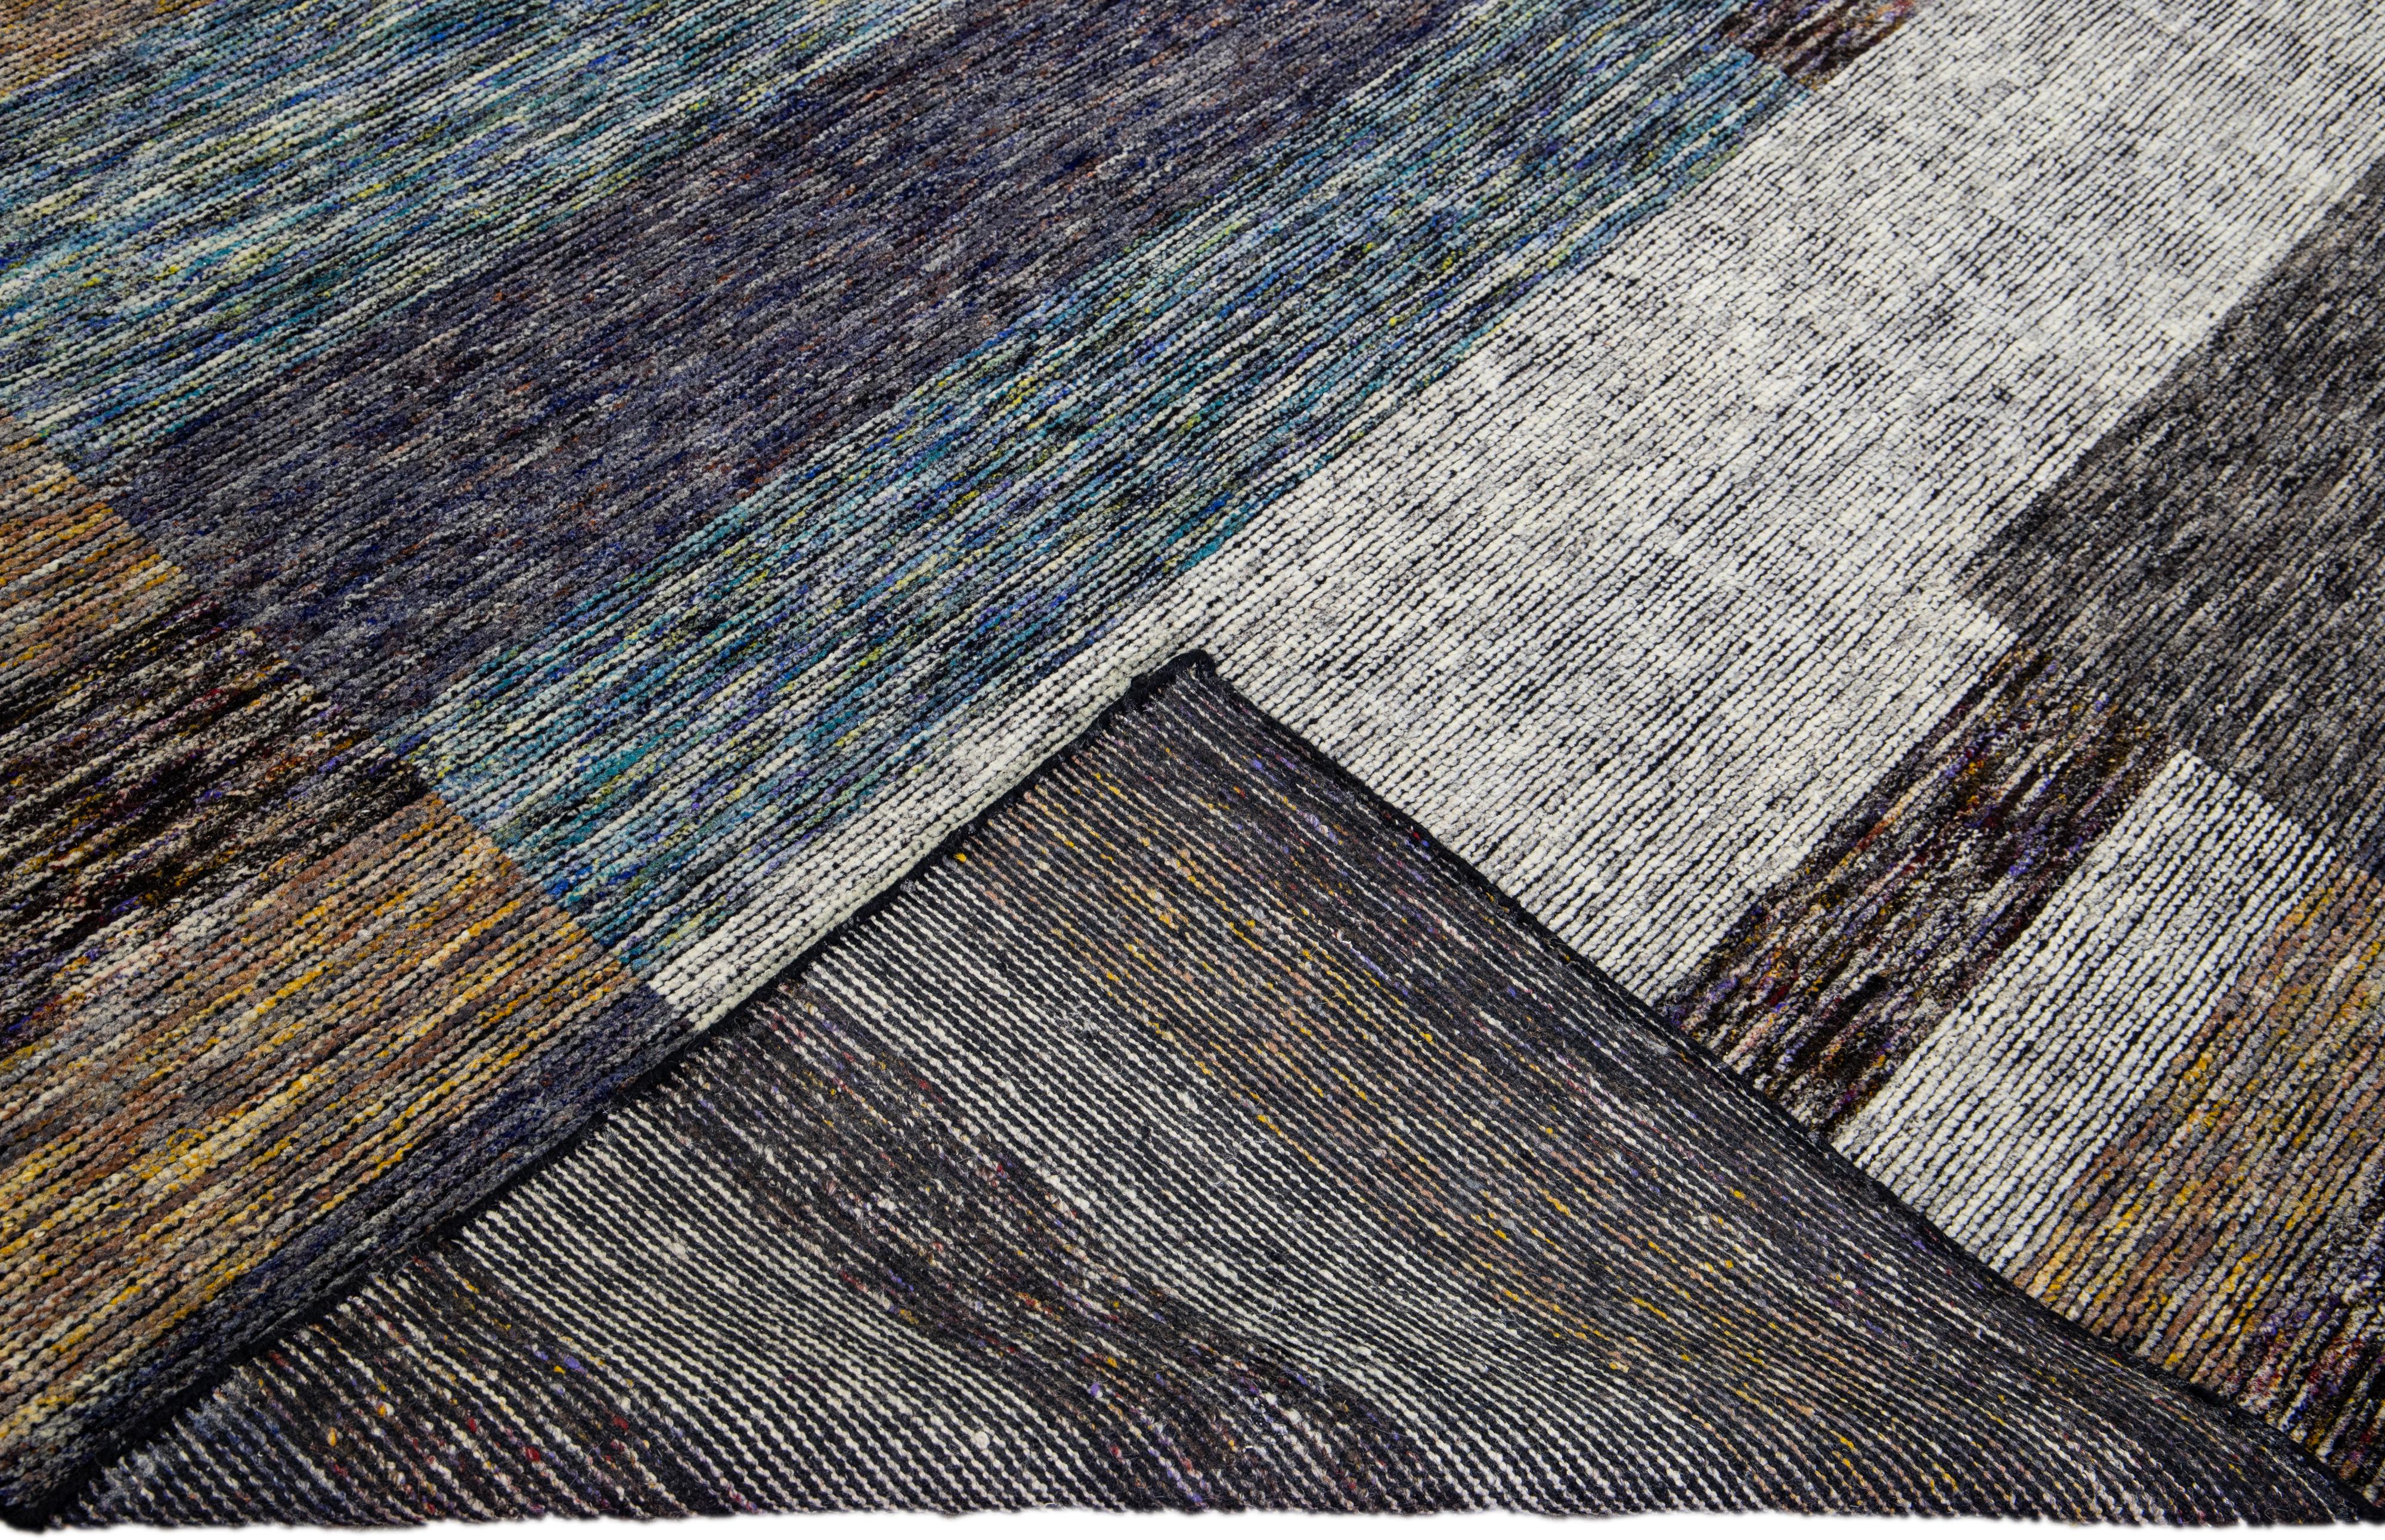 Beautiful modern Apadana's Safi Collection hand-knotted wool rug with an earthy colors field. This Modern rug has blue, gray, and brown accents a gorgeous layout Abstract design.

This rug measures: 9'2